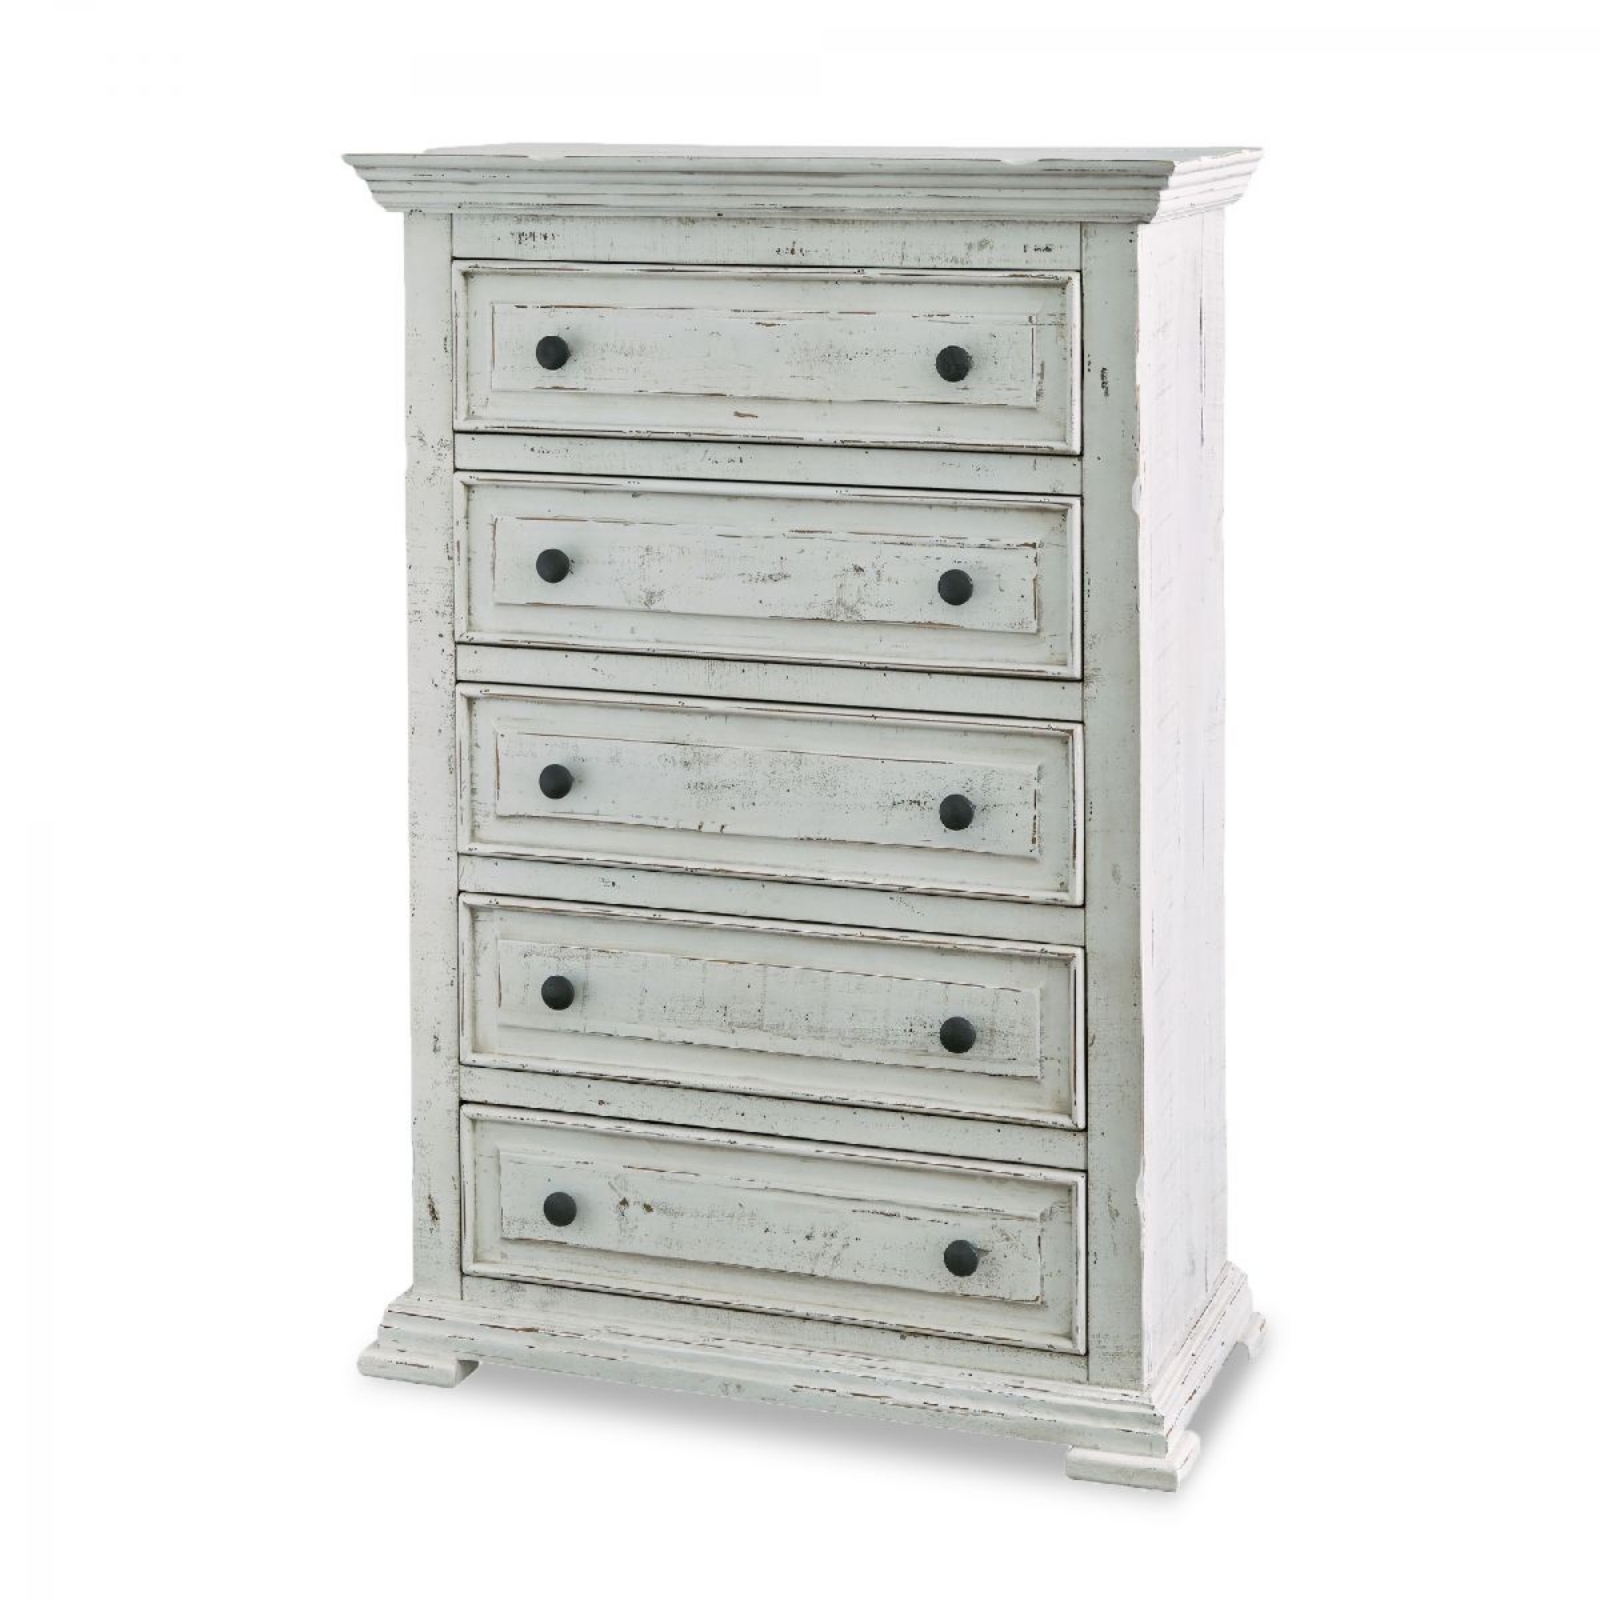 Picture of Olivia Chest of Drawers